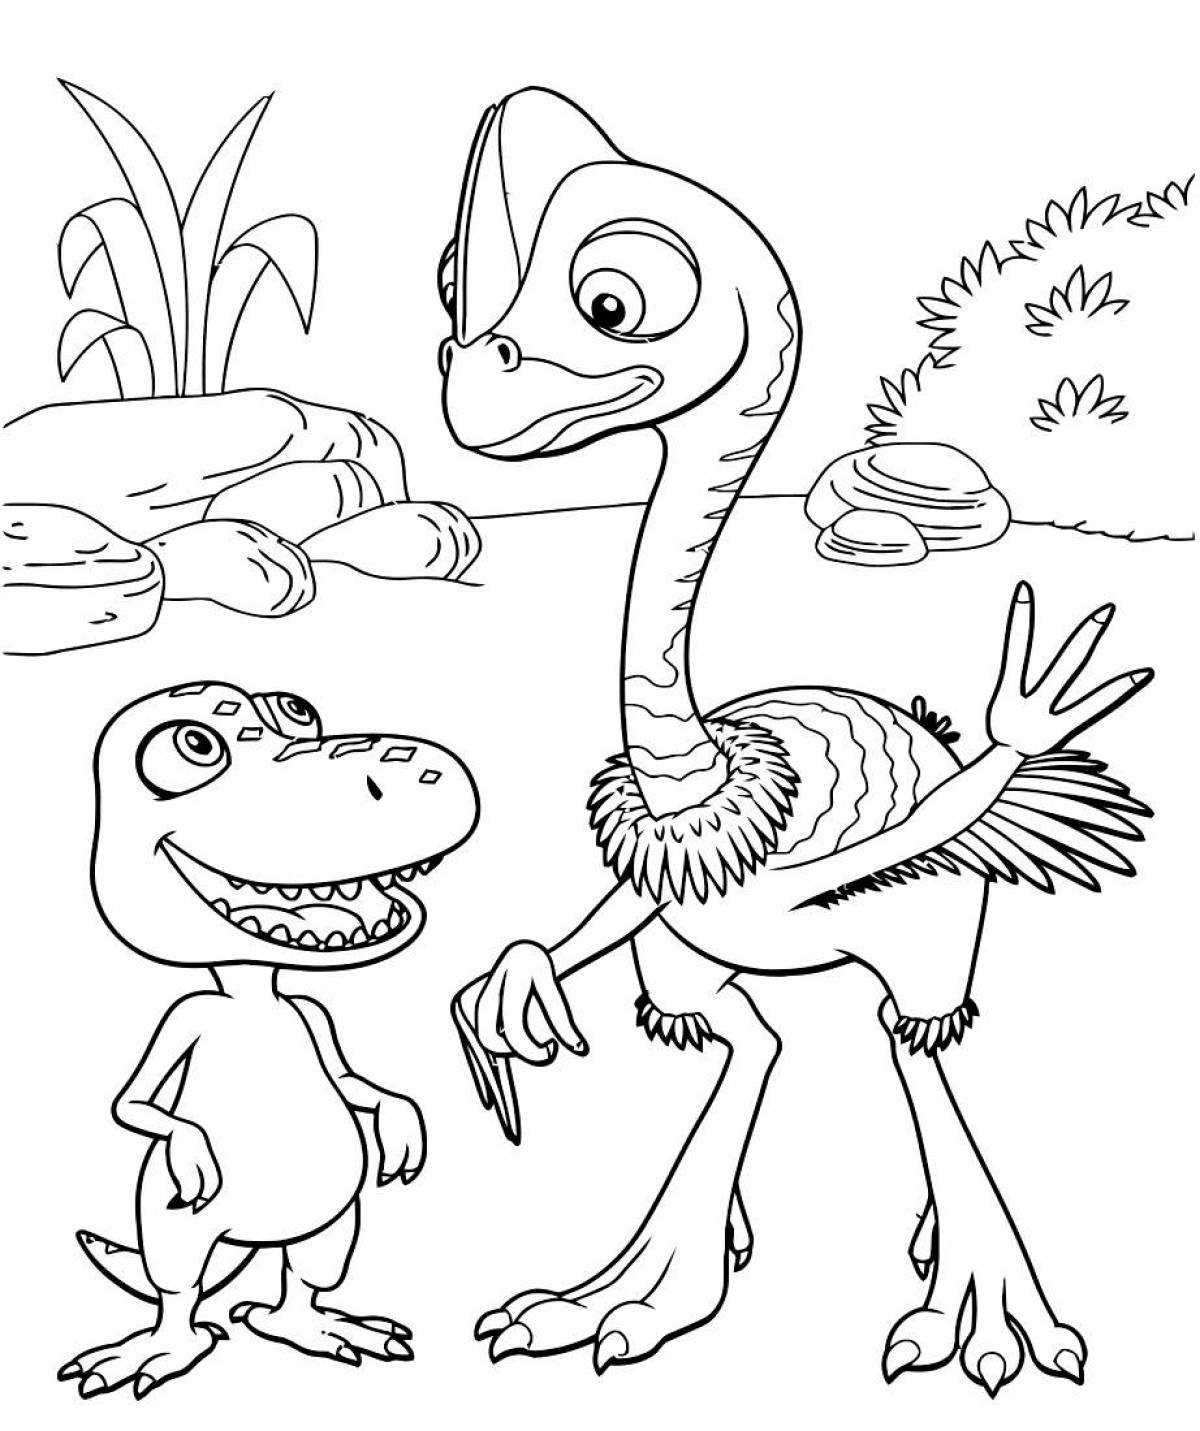 Gorgeous Turbosaurus coloring page